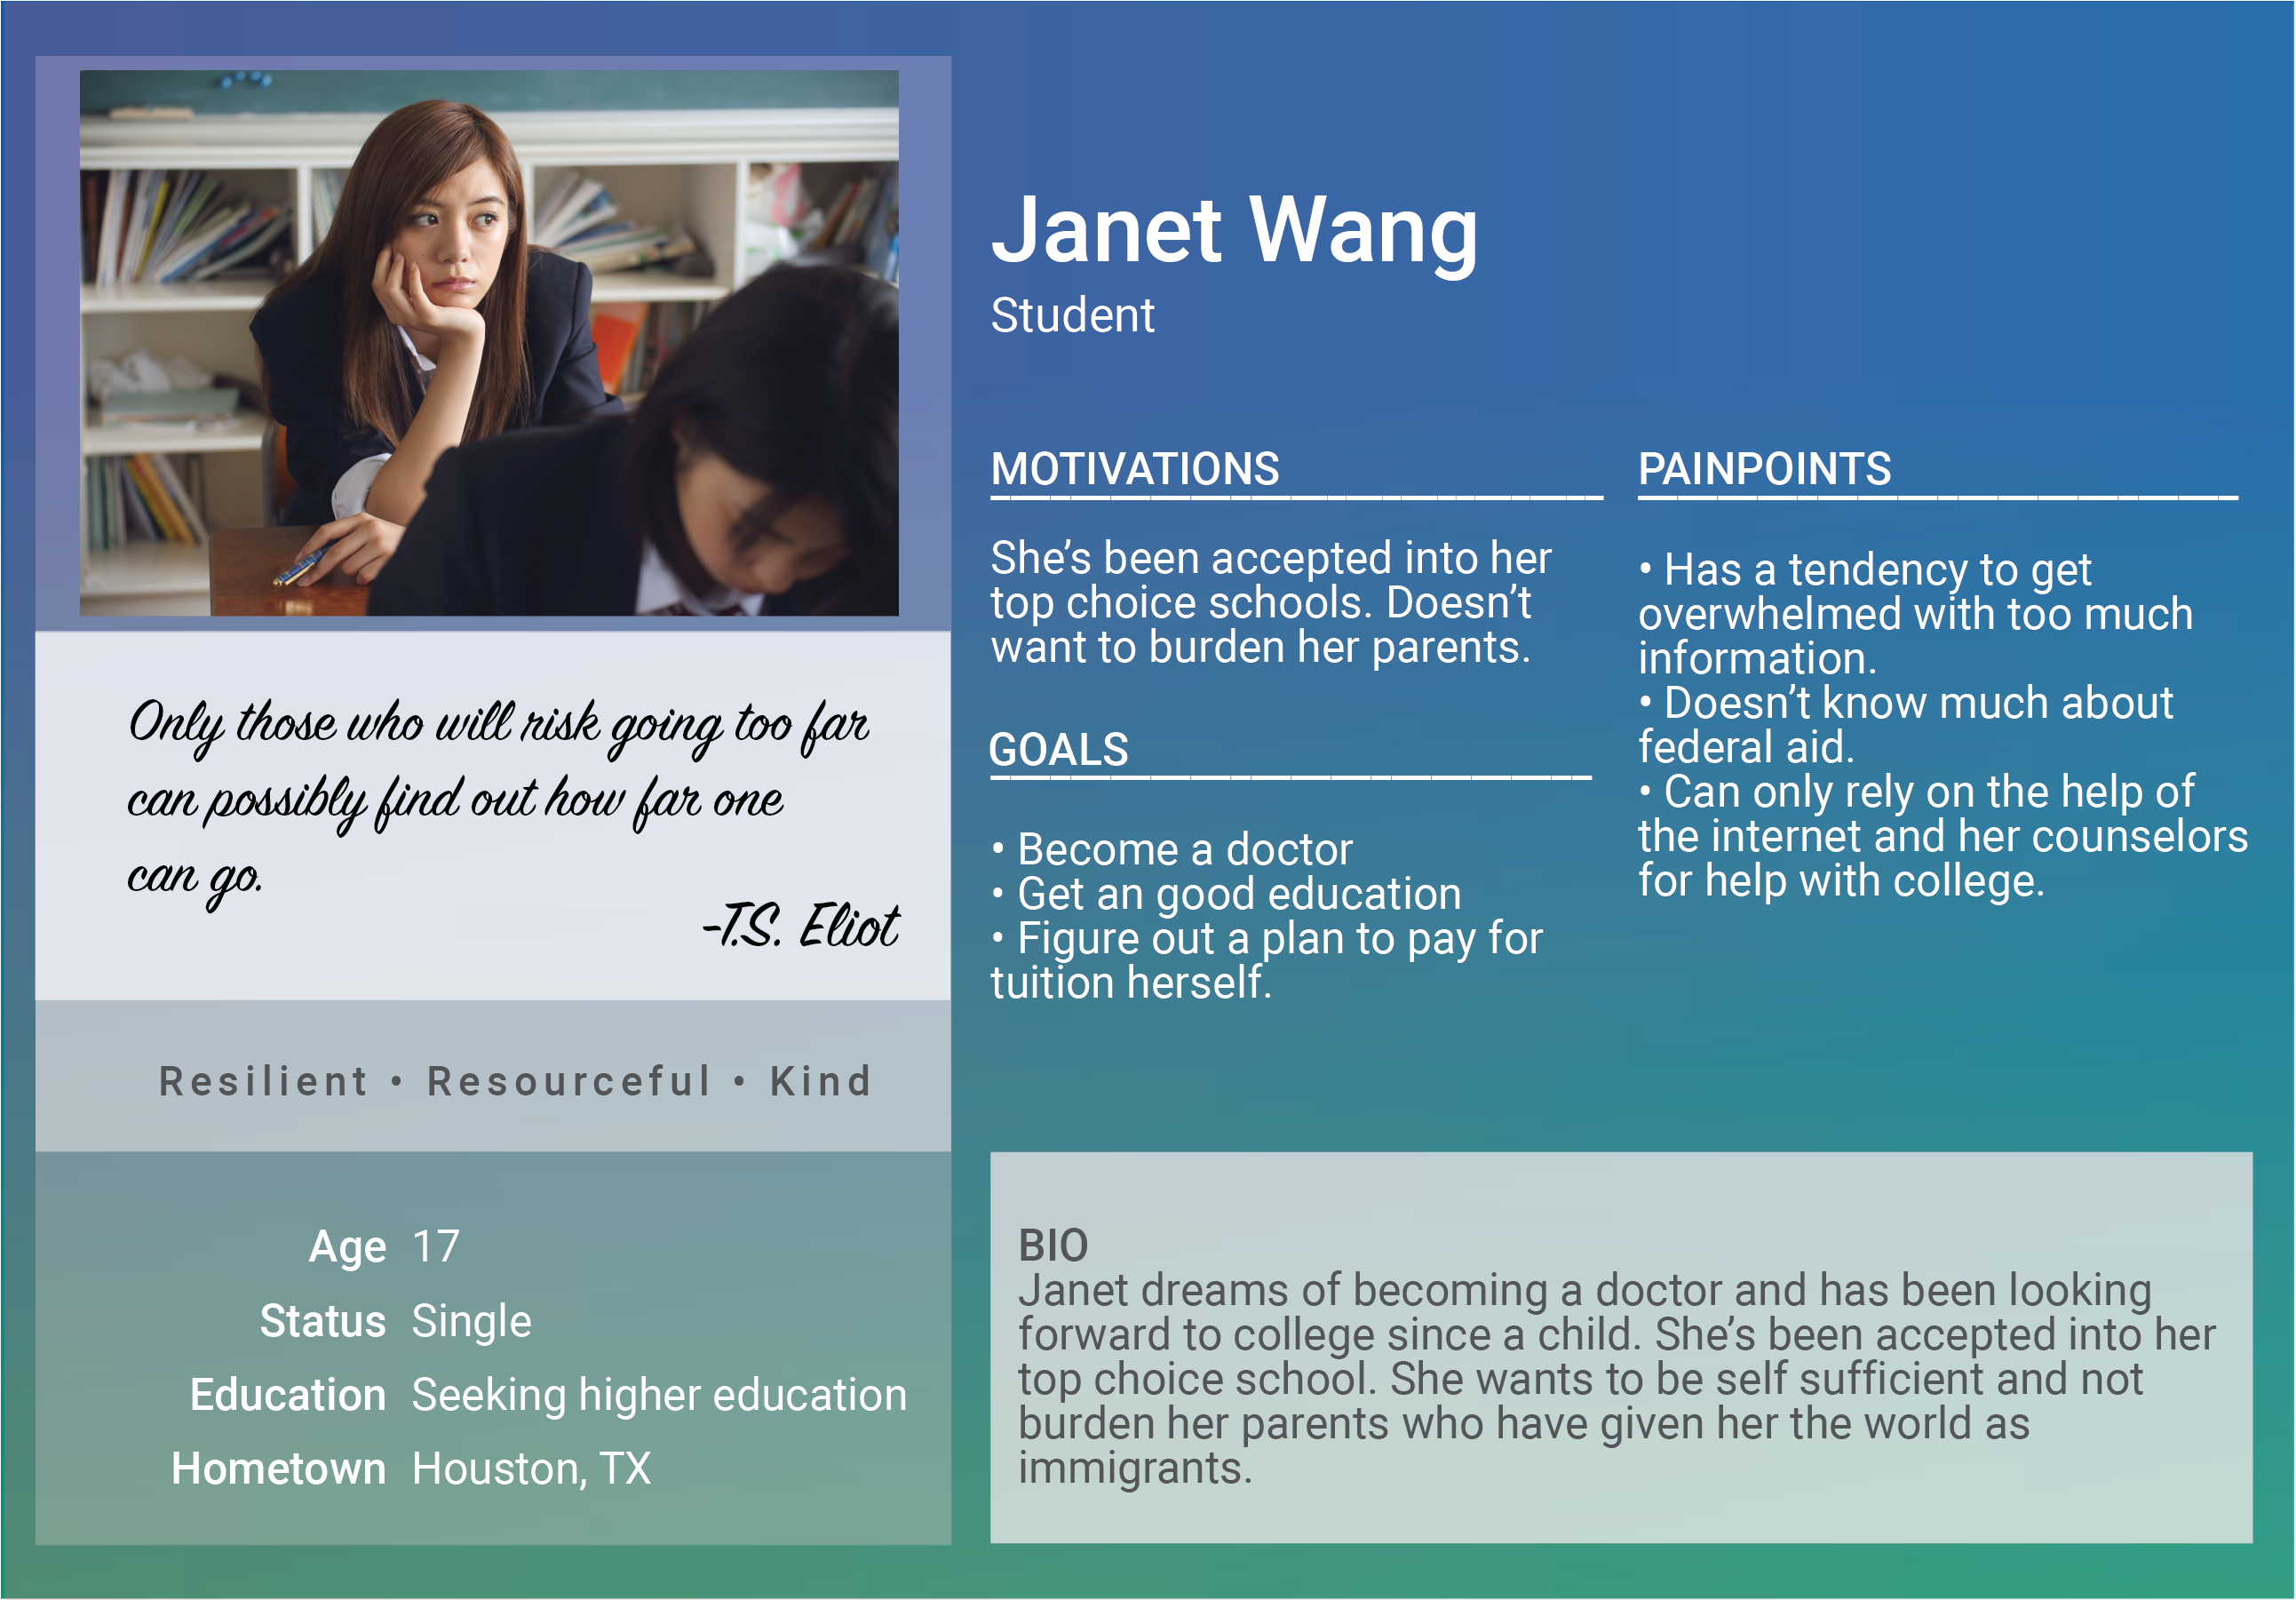 User Persona showcasing Janet Wong. Janet is a senior in high school and has been accepted to her top choice schools. She want's to be self-sufficient and doesn't want to burden her parents with her tuition fees. Her goals are to go to a good school to become a doctor, while figuring out a way to pay for her tuition herself. Some issues Janet has is getting overwhelmed with large amounts of information. She also doesn't know much about federal aid since she's the first in her family to attend college. Currently she can only rely on the internet and her counselors for help.